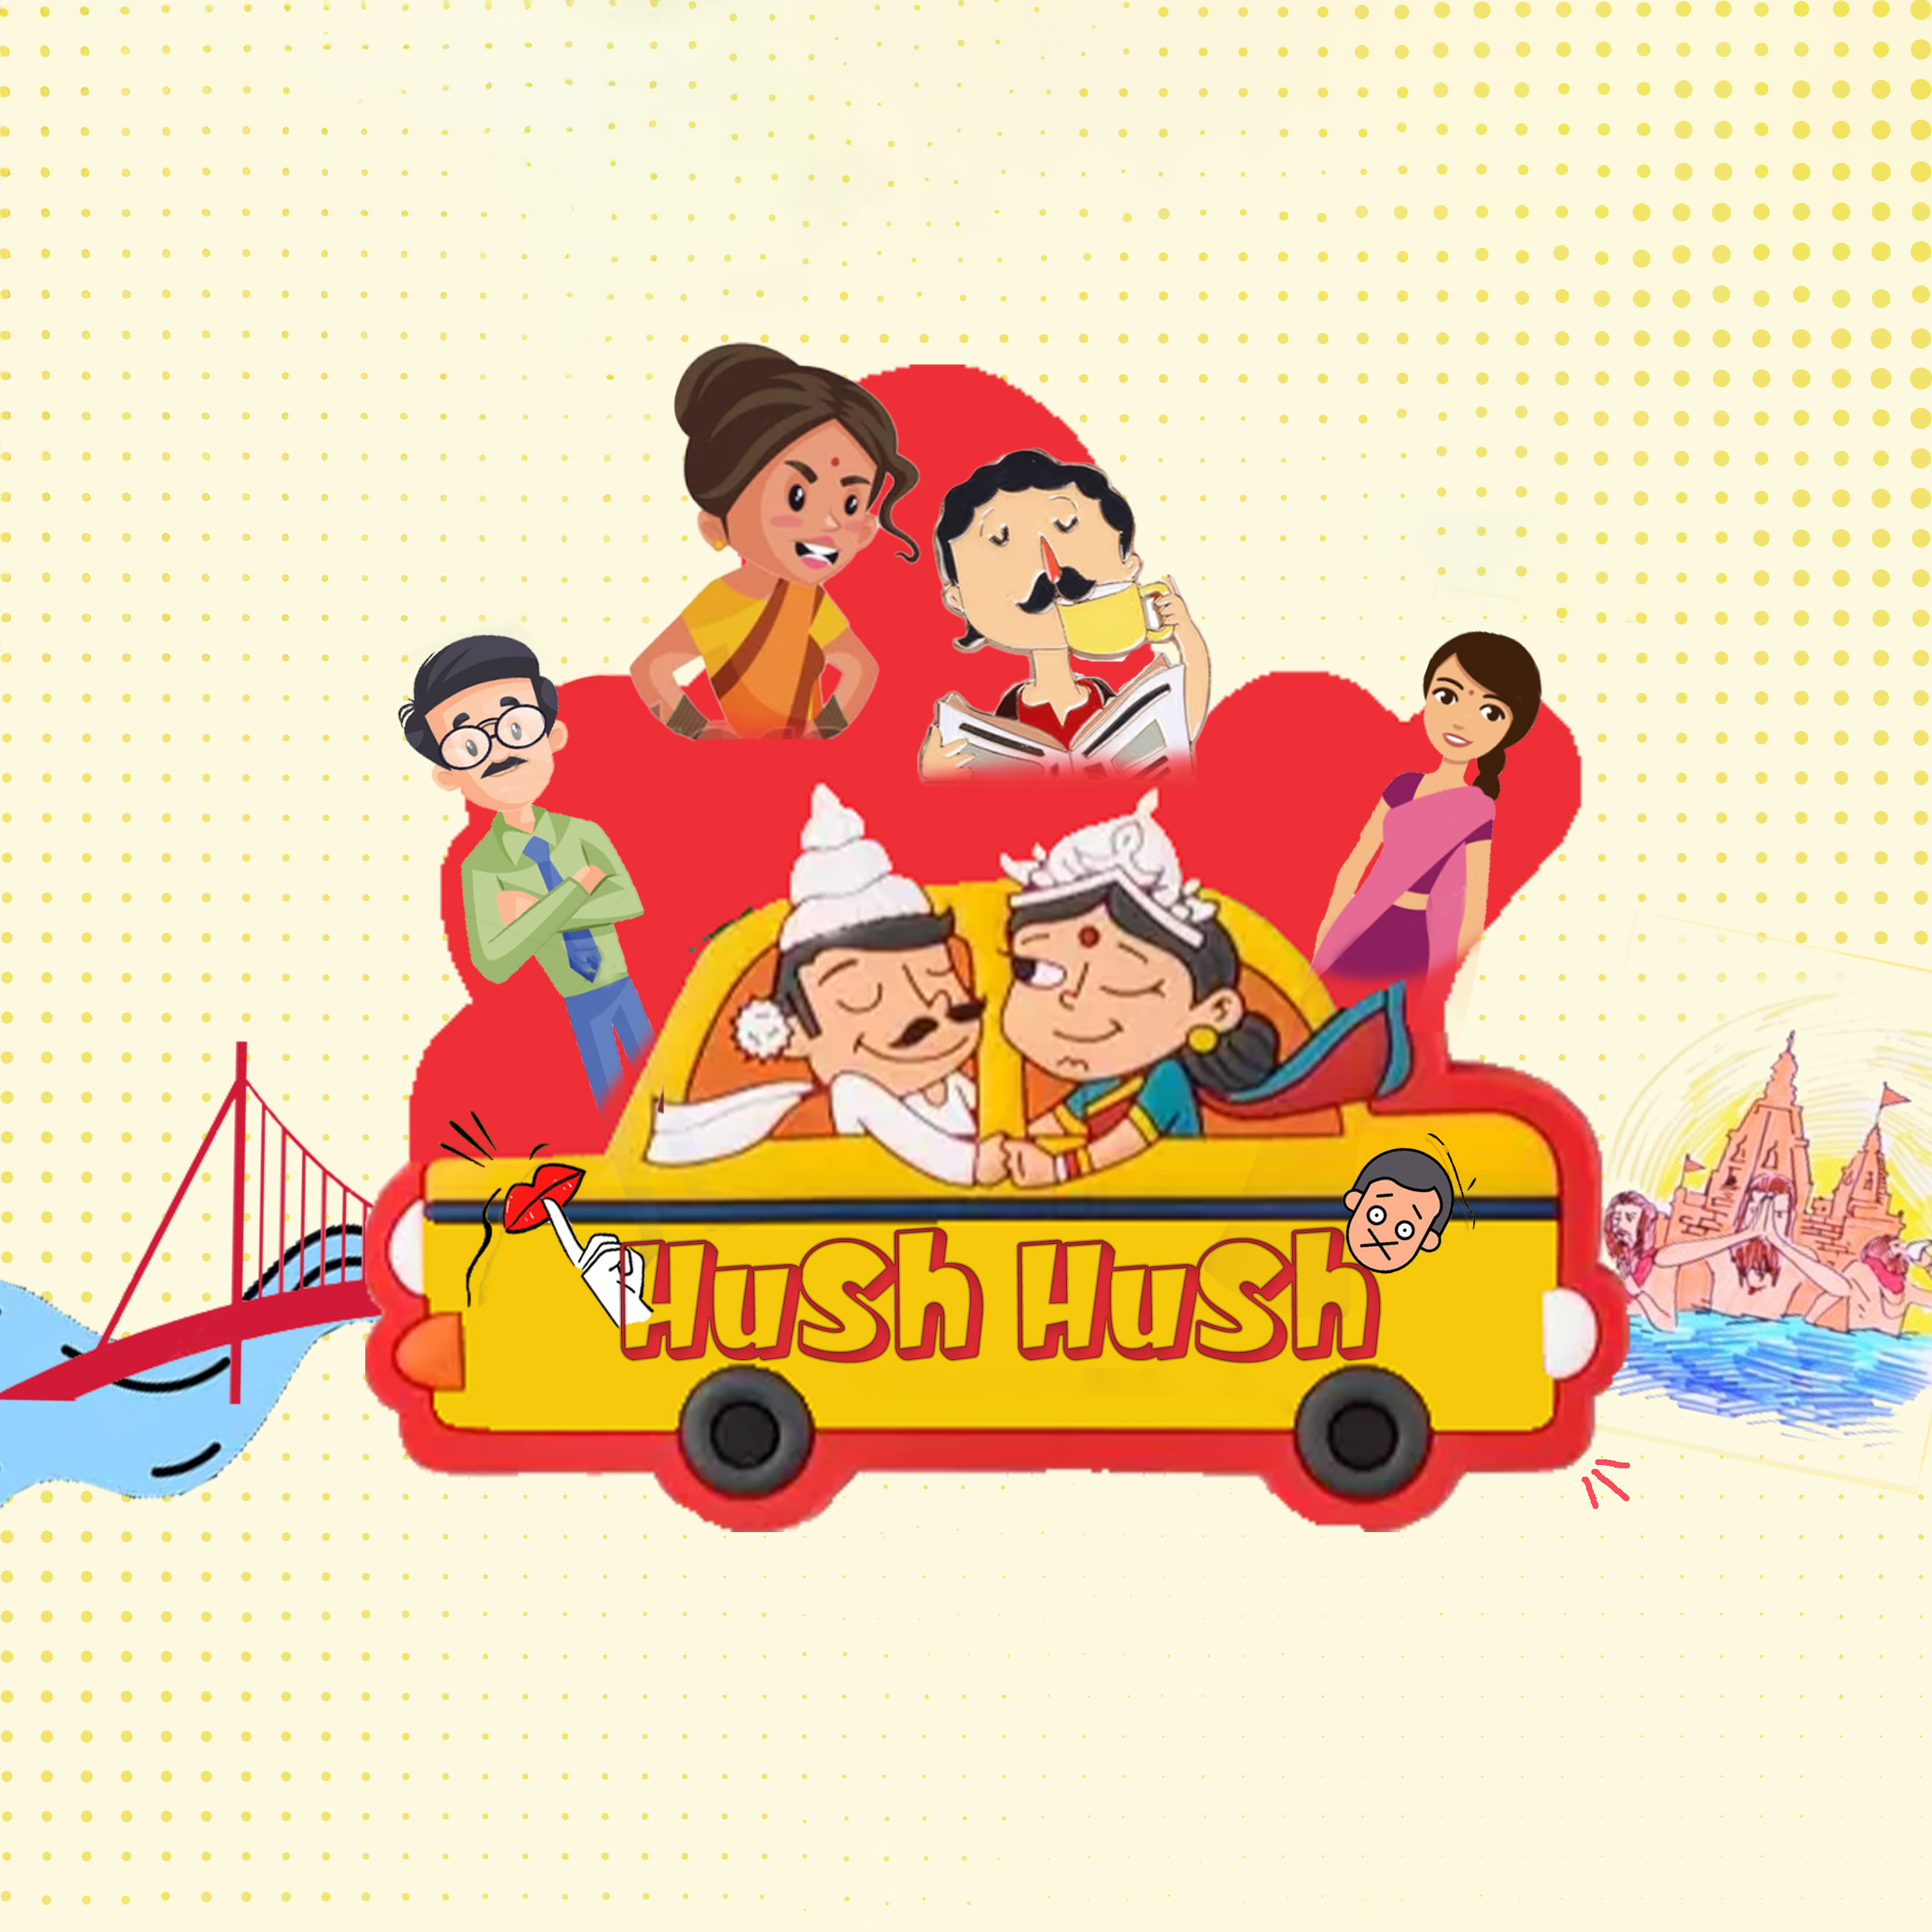 The Hush, Hush logo shows a cartoon couple in a yellow car surrounded by other members of their community